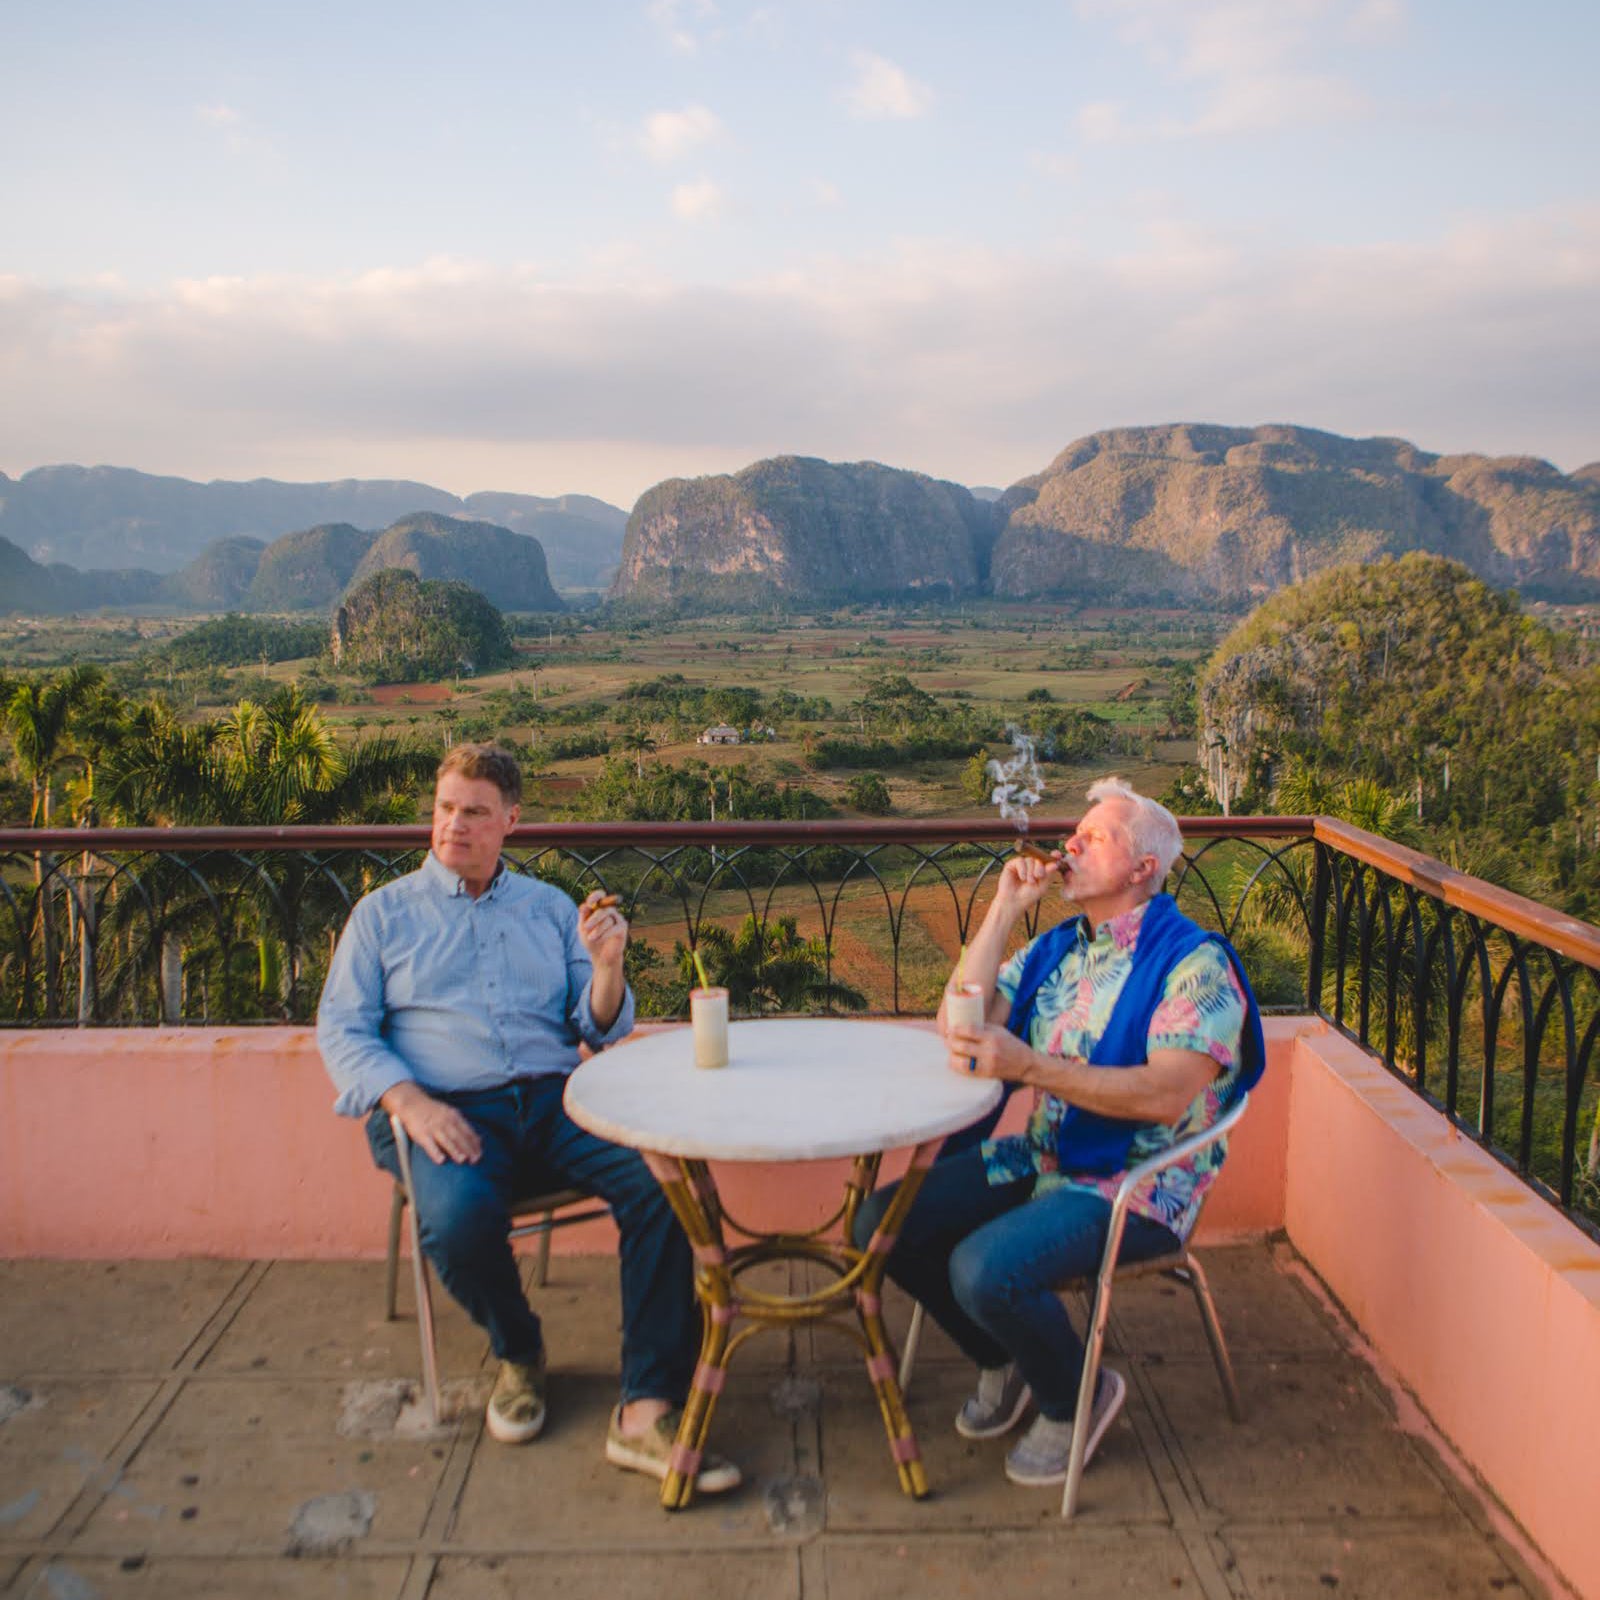 Gardner Tours Premium Cuba Cigar Tour Two Men dressed nicely and smoking cigars at the Viewpoint over Vinales Valley in Vinales Cuba